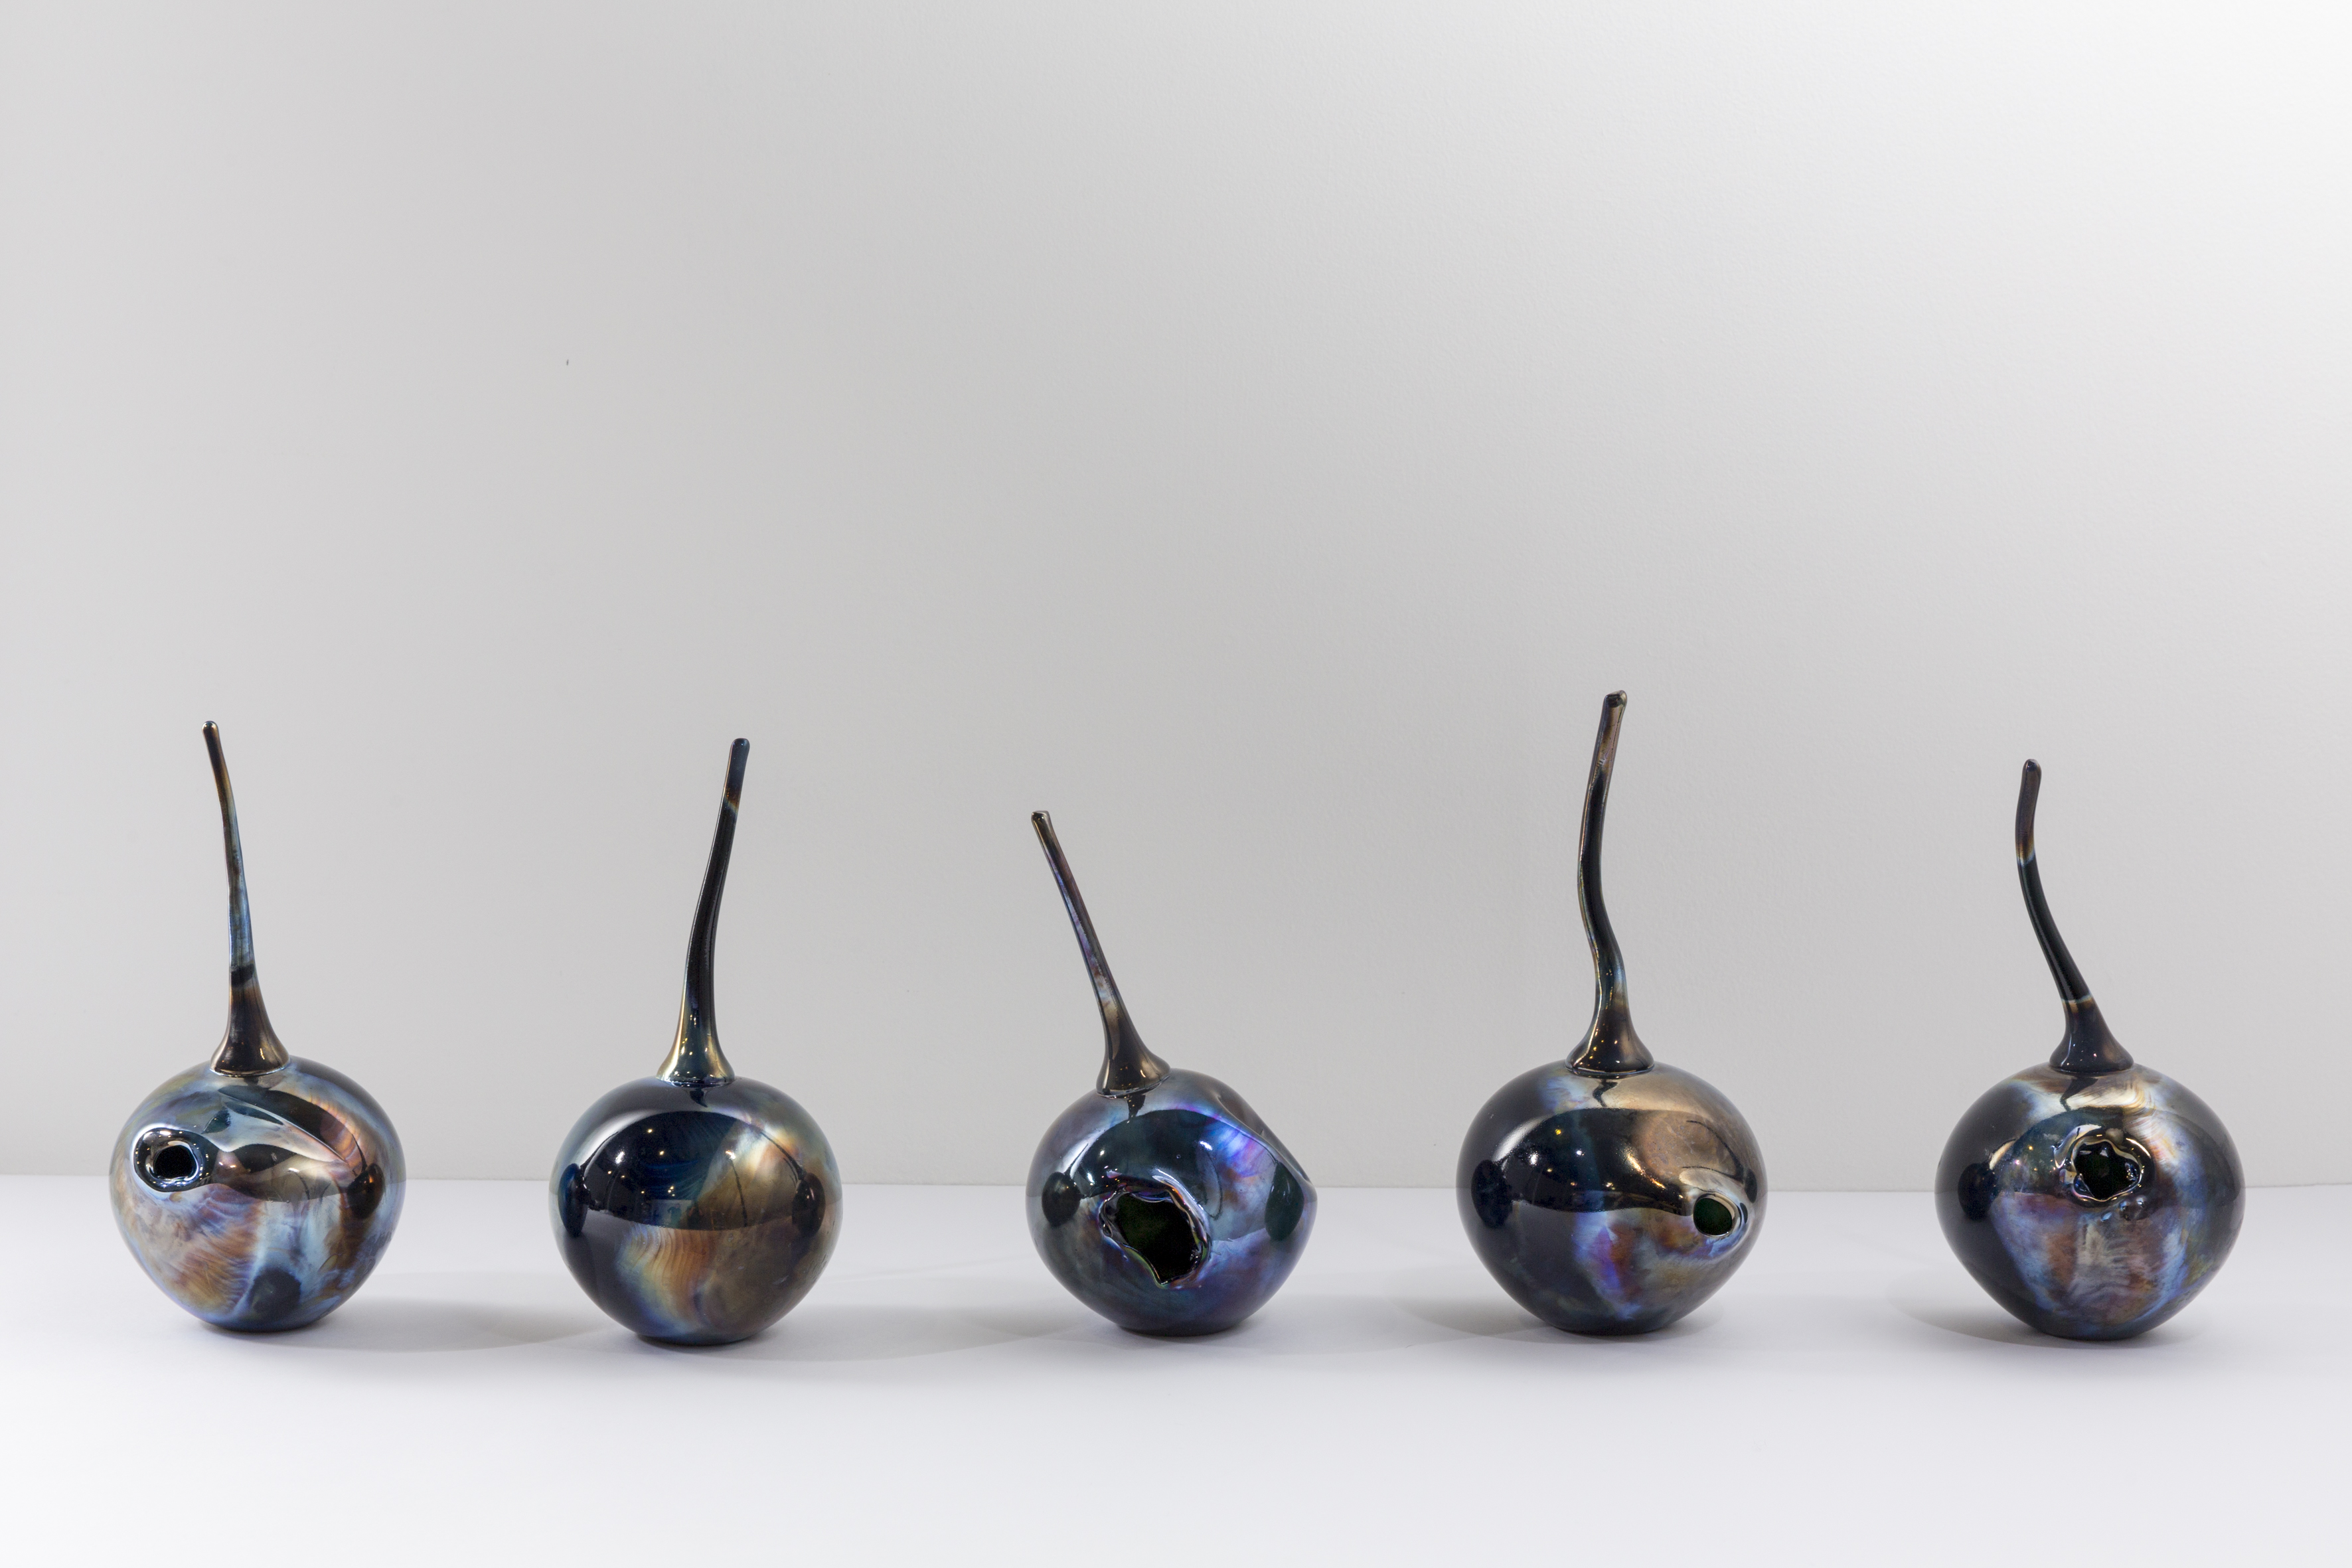 Yhonnie SCARCE 'Only a mother could love them' 2016, hand blown glass, 25 x 15cm diameter each (variable sizes - approx.). Monash University Collection. Purchased by the Monash Business School 2017. Courtesy of Monash University Museum of Art. Courtesy of the artist and THIS IS NO FANTASY, Melbourne.